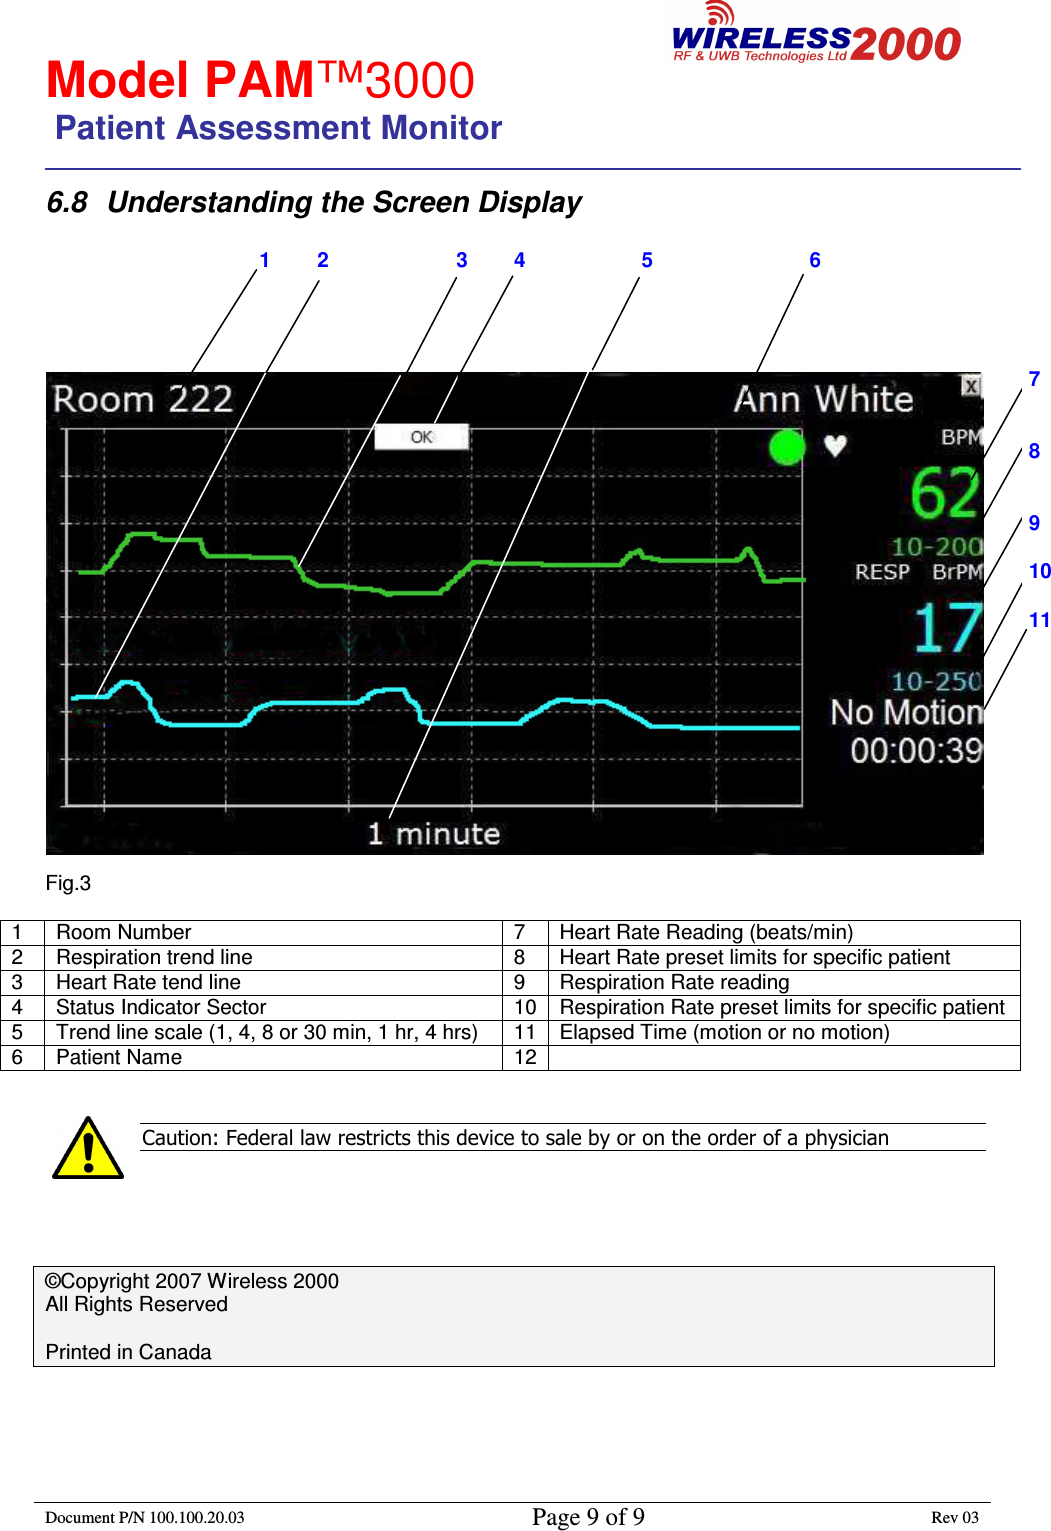                                                        Model PAM™3000                 Patient Assessment Monitor                                                                        Document P/N 100.100.20.03 Page 9 of 9 Rev 03                                                                                                                                         6.8  Understanding the Screen Display                                        1        2                      3        4                    5                           6                                                                                           Fig.3  1  Room Number  7  Heart Rate Reading (beats/min) 2  Respiration trend line  8  Heart Rate preset limits for specific patient 3  Heart Rate tend line  9  Respiration Rate reading 4  Status Indicator Sector  10 Respiration Rate preset limits for specific patient 5  Trend line scale (1, 4, 8 or 30 min, 1 hr, 4 hrs)  11 Elapsed Time (motion or no motion) 6  Patient Name  12    Caution: Federal law restricts this device to sale by or on the order of a physician      ©Copyright 2007 Wireless 2000 All Rights Reserved  Printed in Canada    7   8   9  10  11 